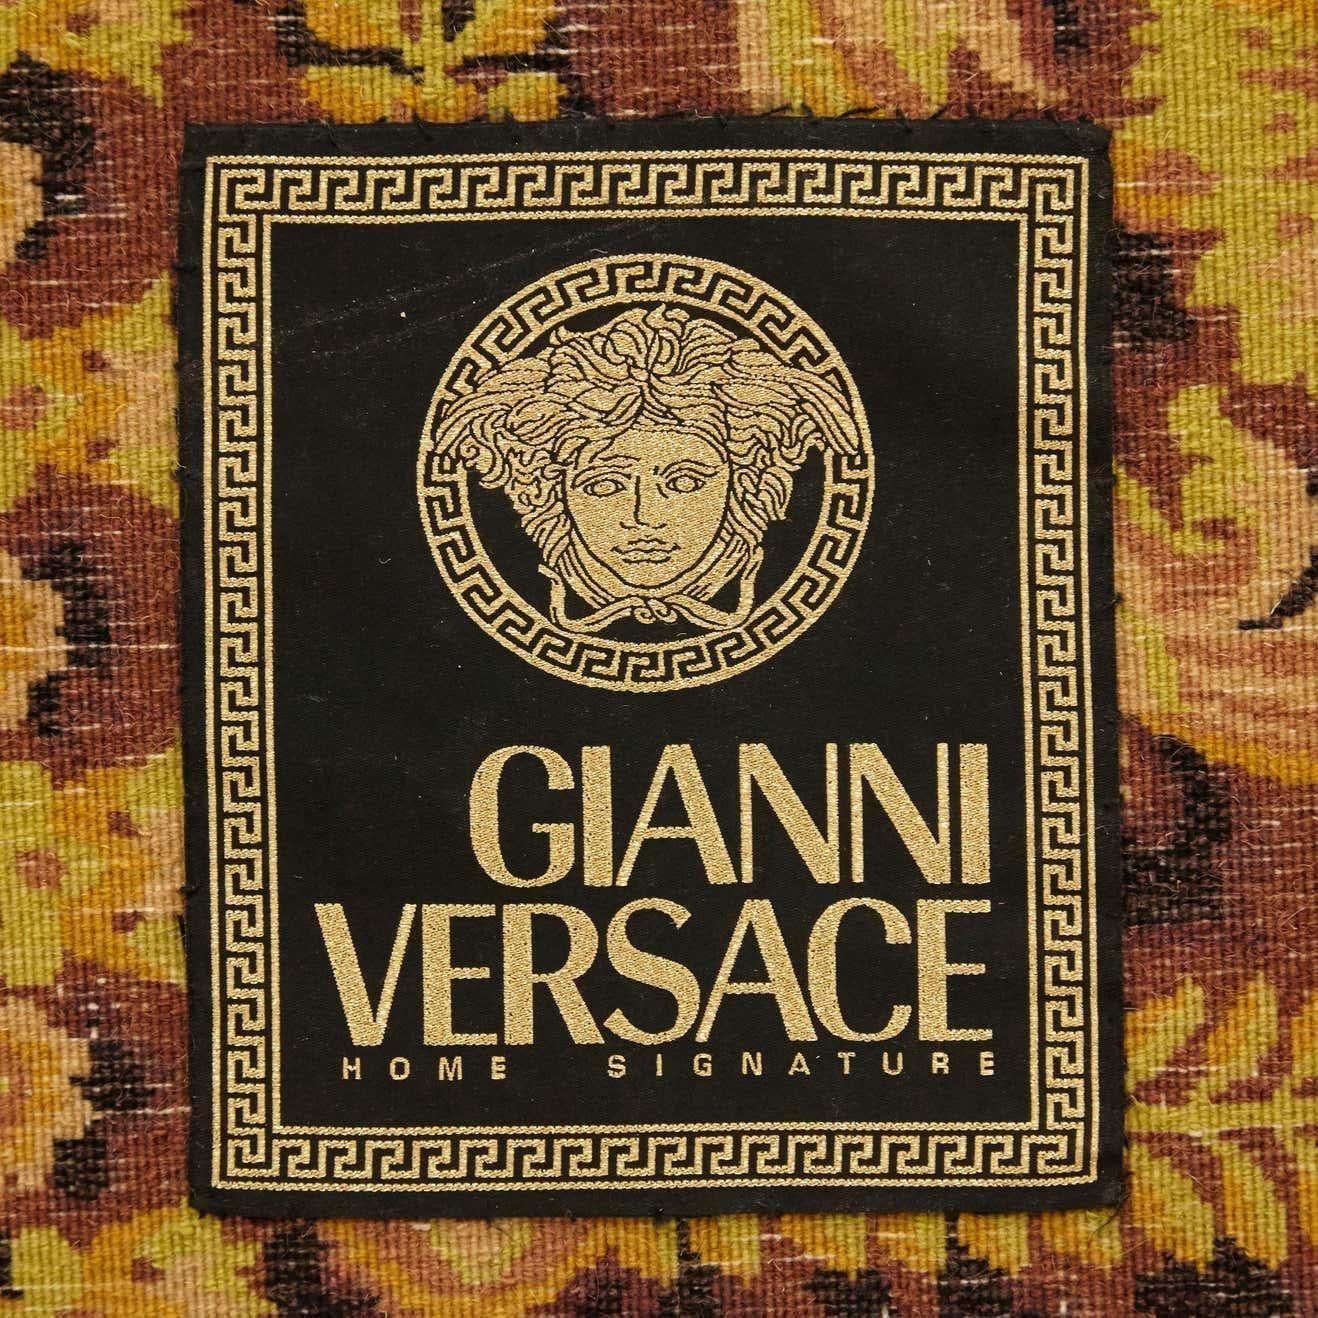 Gianni Versace Collection Rug Wild Barocco, Gold Leopard Animal Print, 1980 For Sale 6